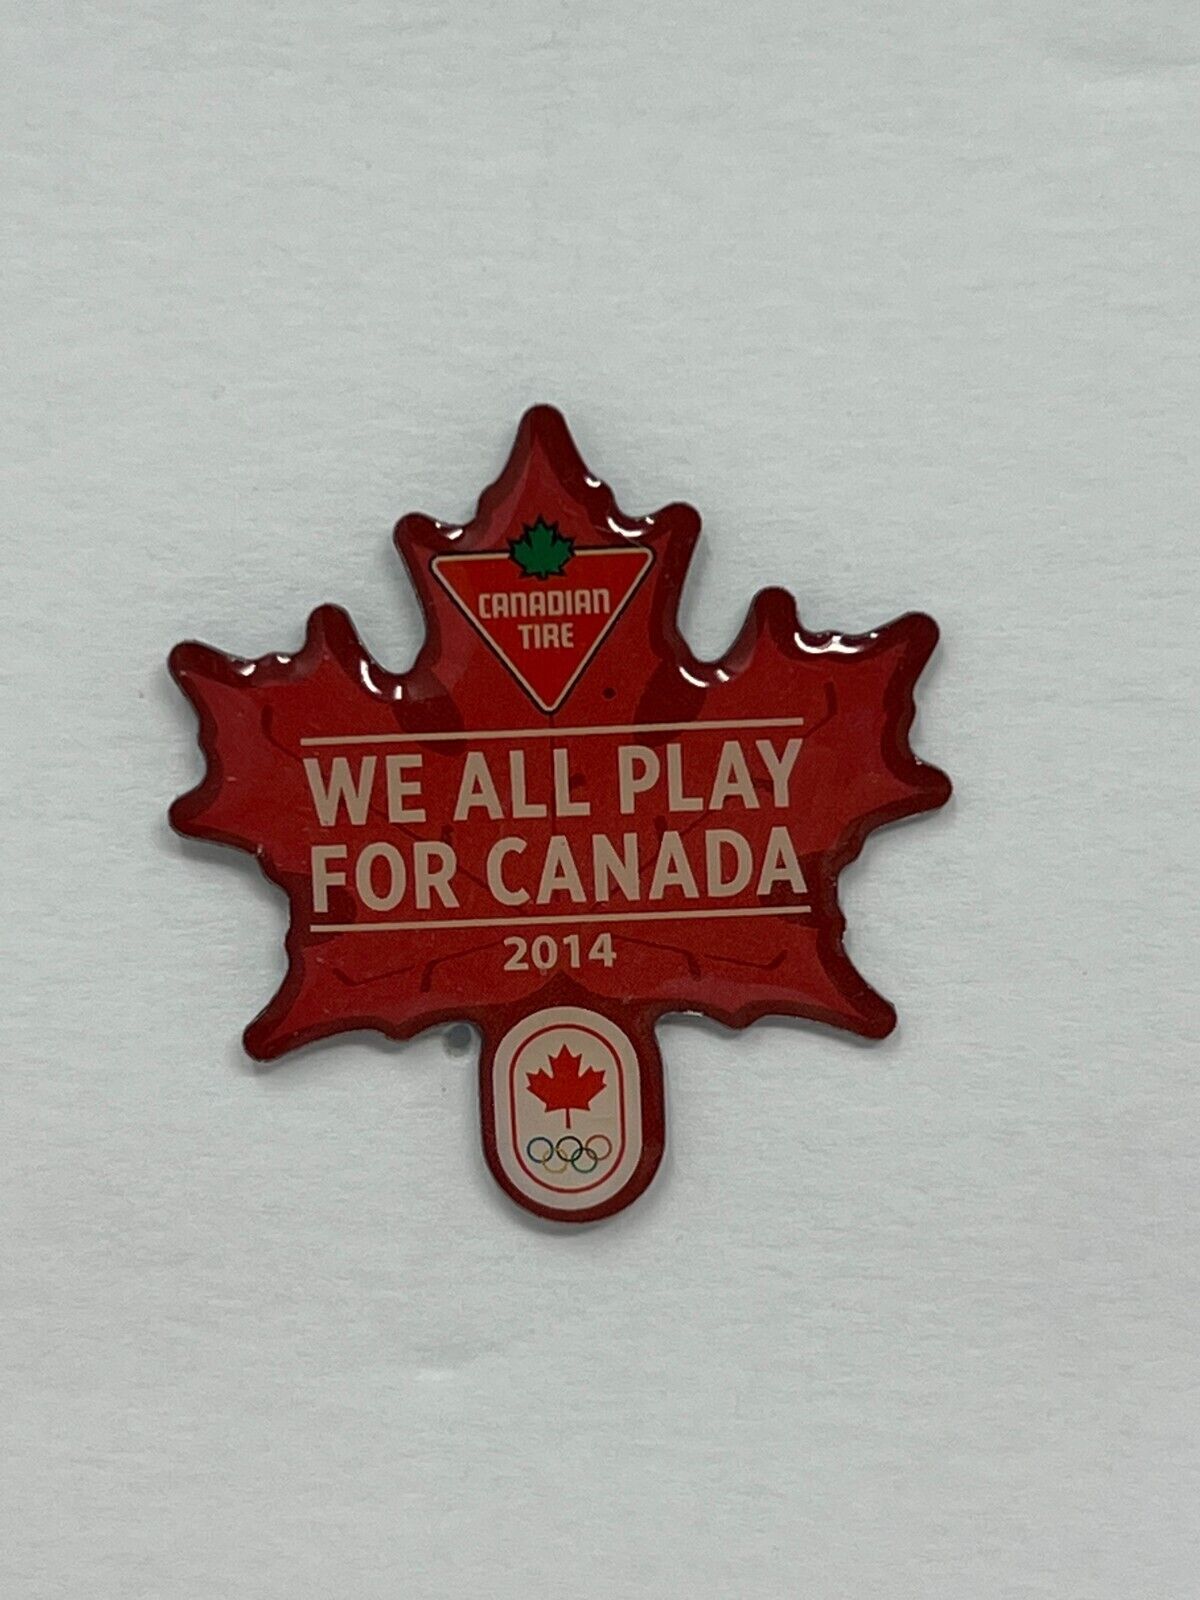 2014 Canadian Tire We All Play for Canada Maple Leaf Olympics Lapel Pin P2